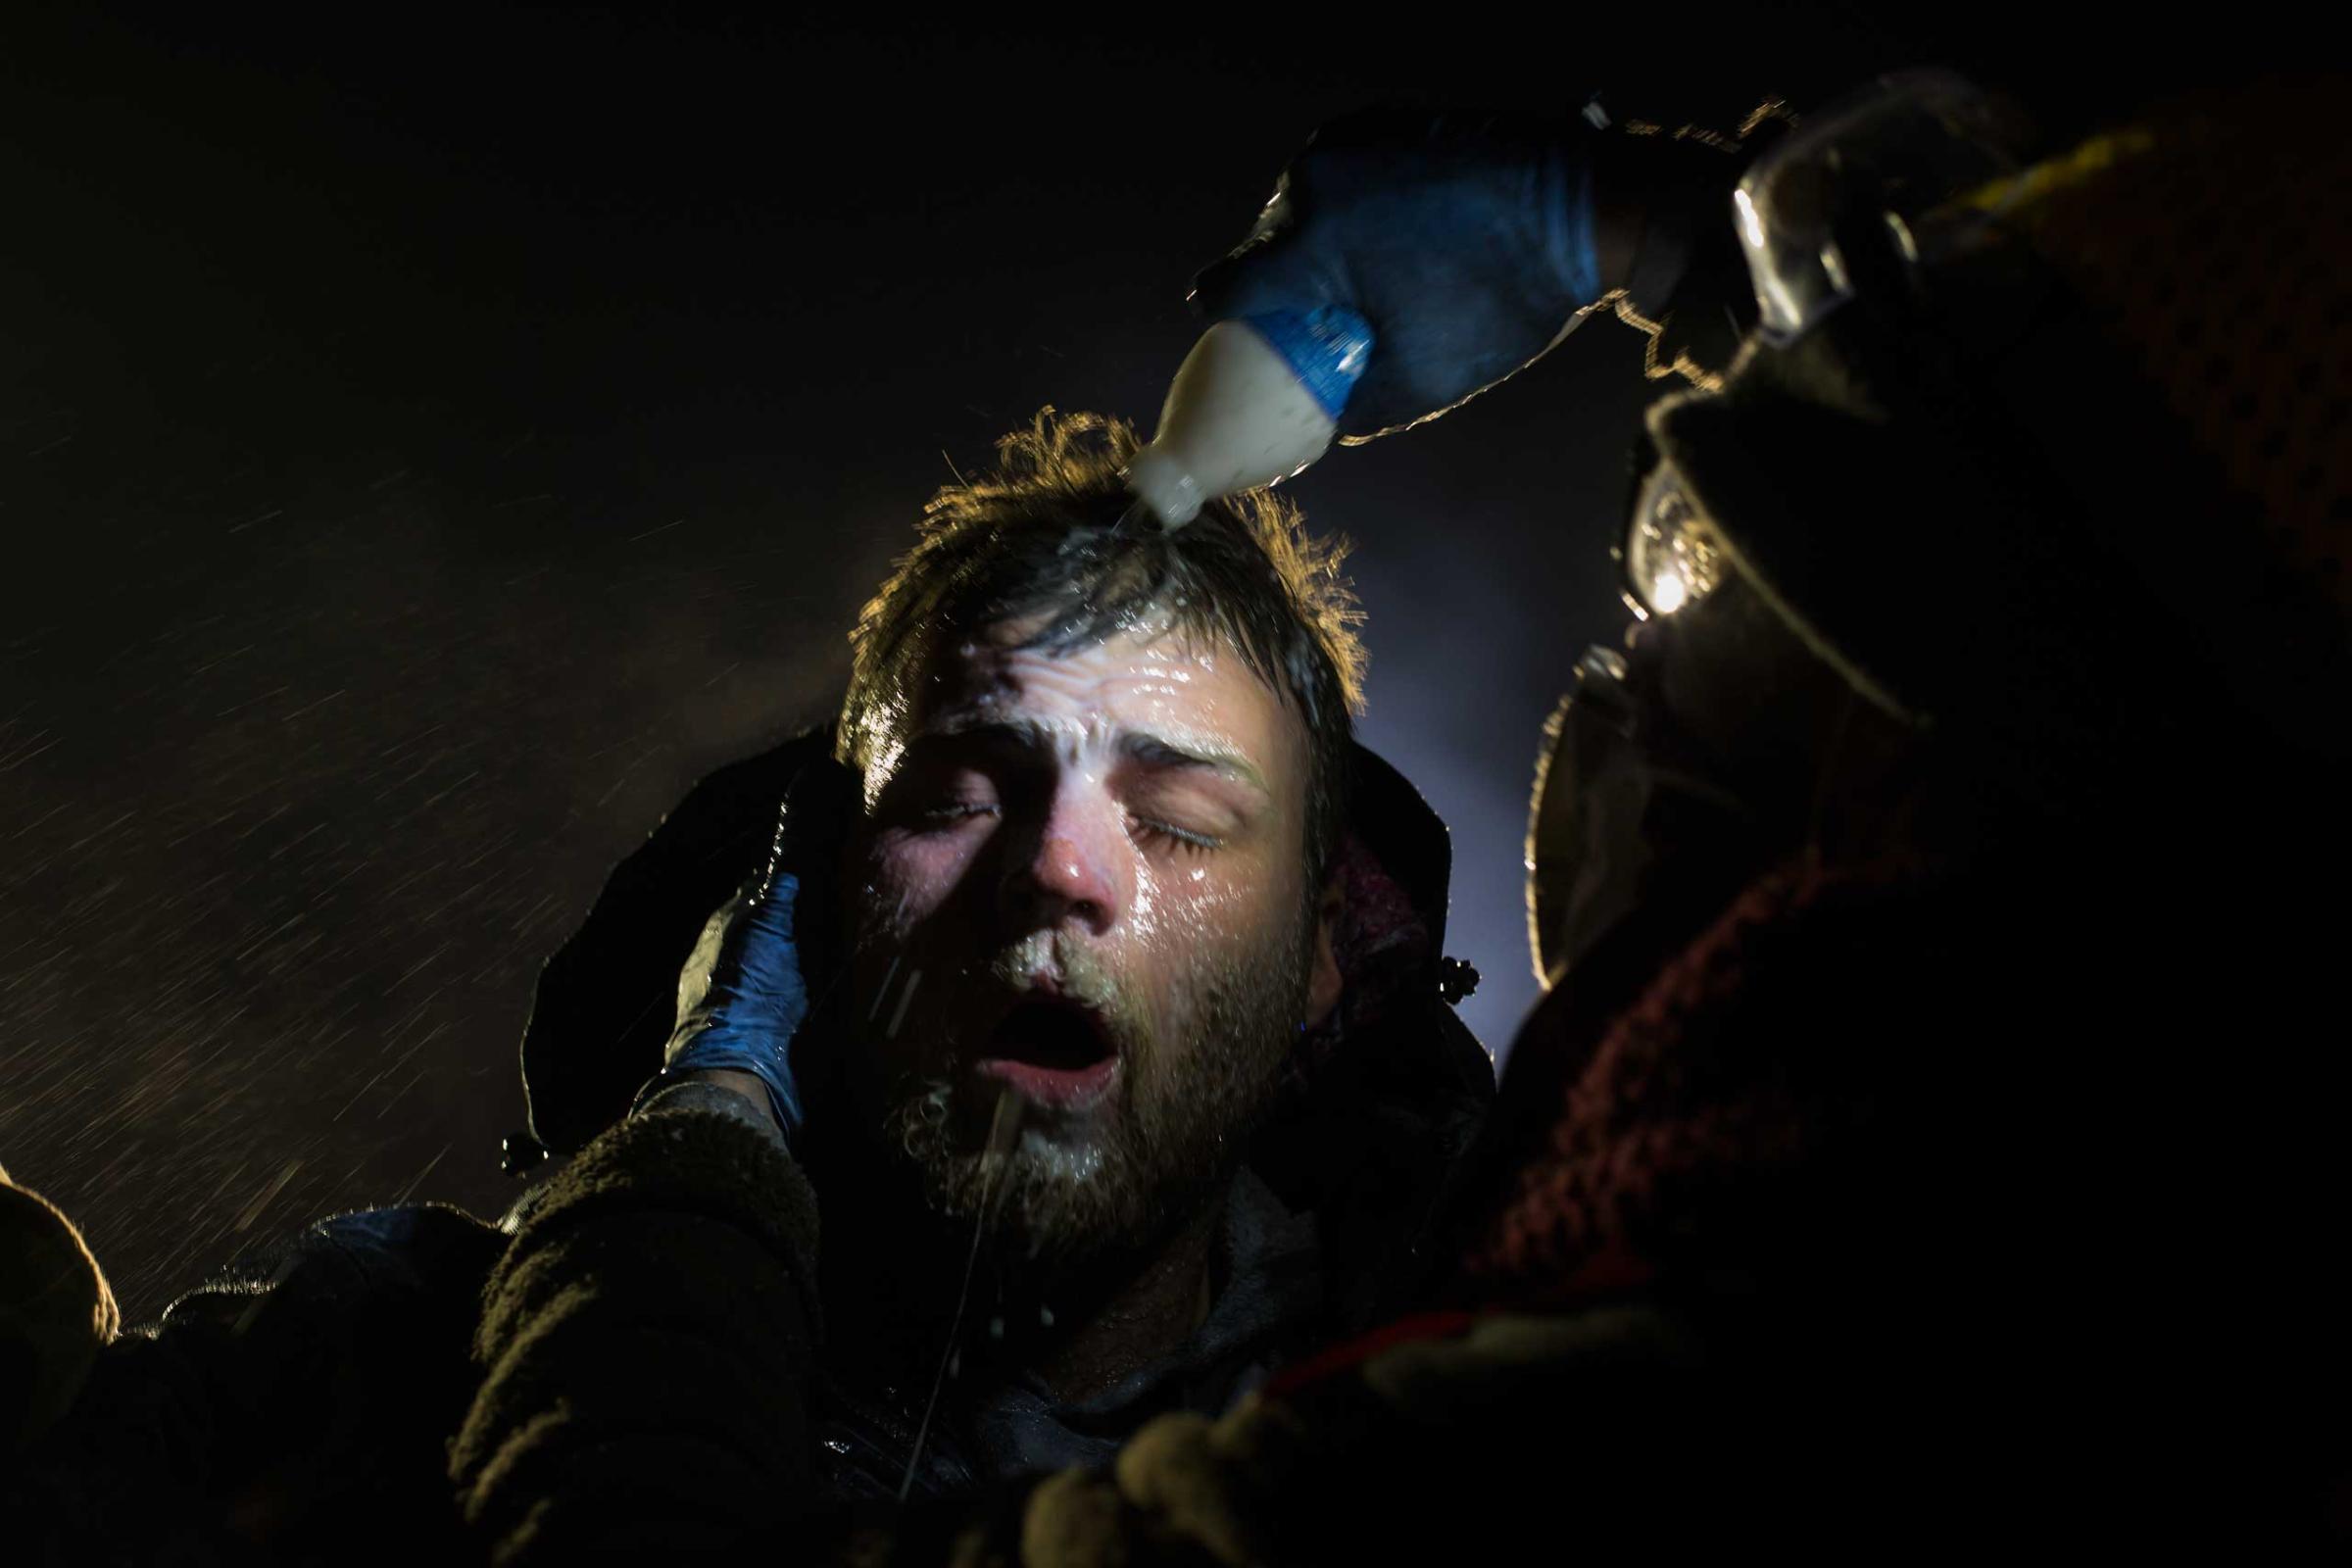 Healers - A man is treated after being pepper sprayed by police. White people have joined the camps in large numbers, often standing in front of indigenous protestors to shield them with their bodies. A man is treated with milk of magnesia after being pepper sprayed at the police blockade on highway 1806 near Cannon Ball, North Dakota on Sunday, November 20, 2016. Many people were injured when, with temperatures below freezing, police deployed water canons, pepper spray, tear gas, rubber bullets and percussion grenades. Amber Bracken